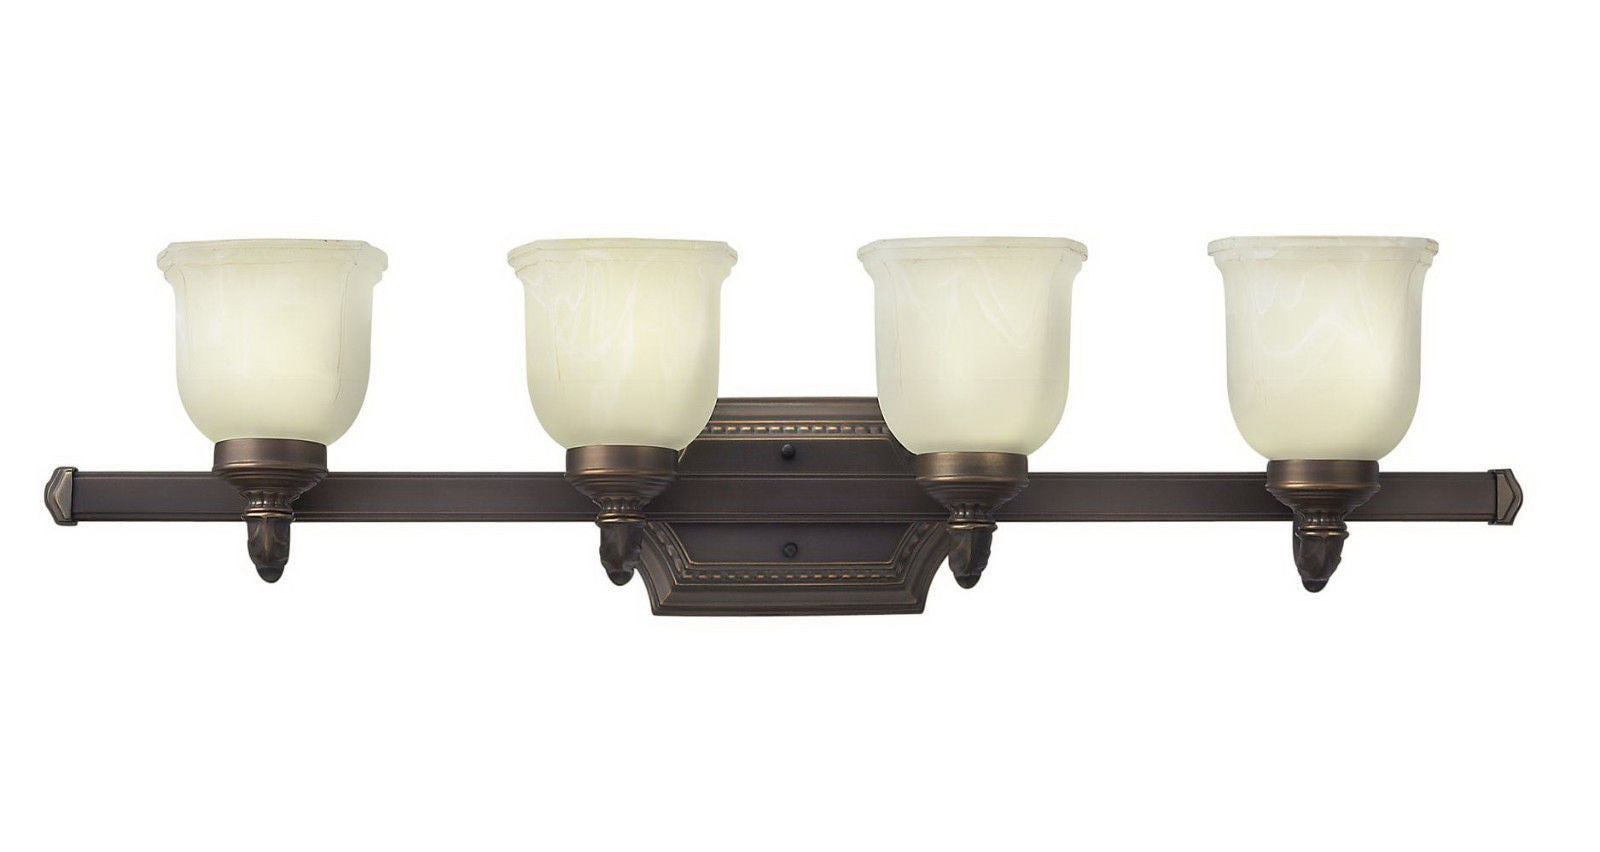 Hinkley Lighting 5904 OB Abigail Collection Four Light Bath Vanity Wall Fixture in Olde Bronze Finish